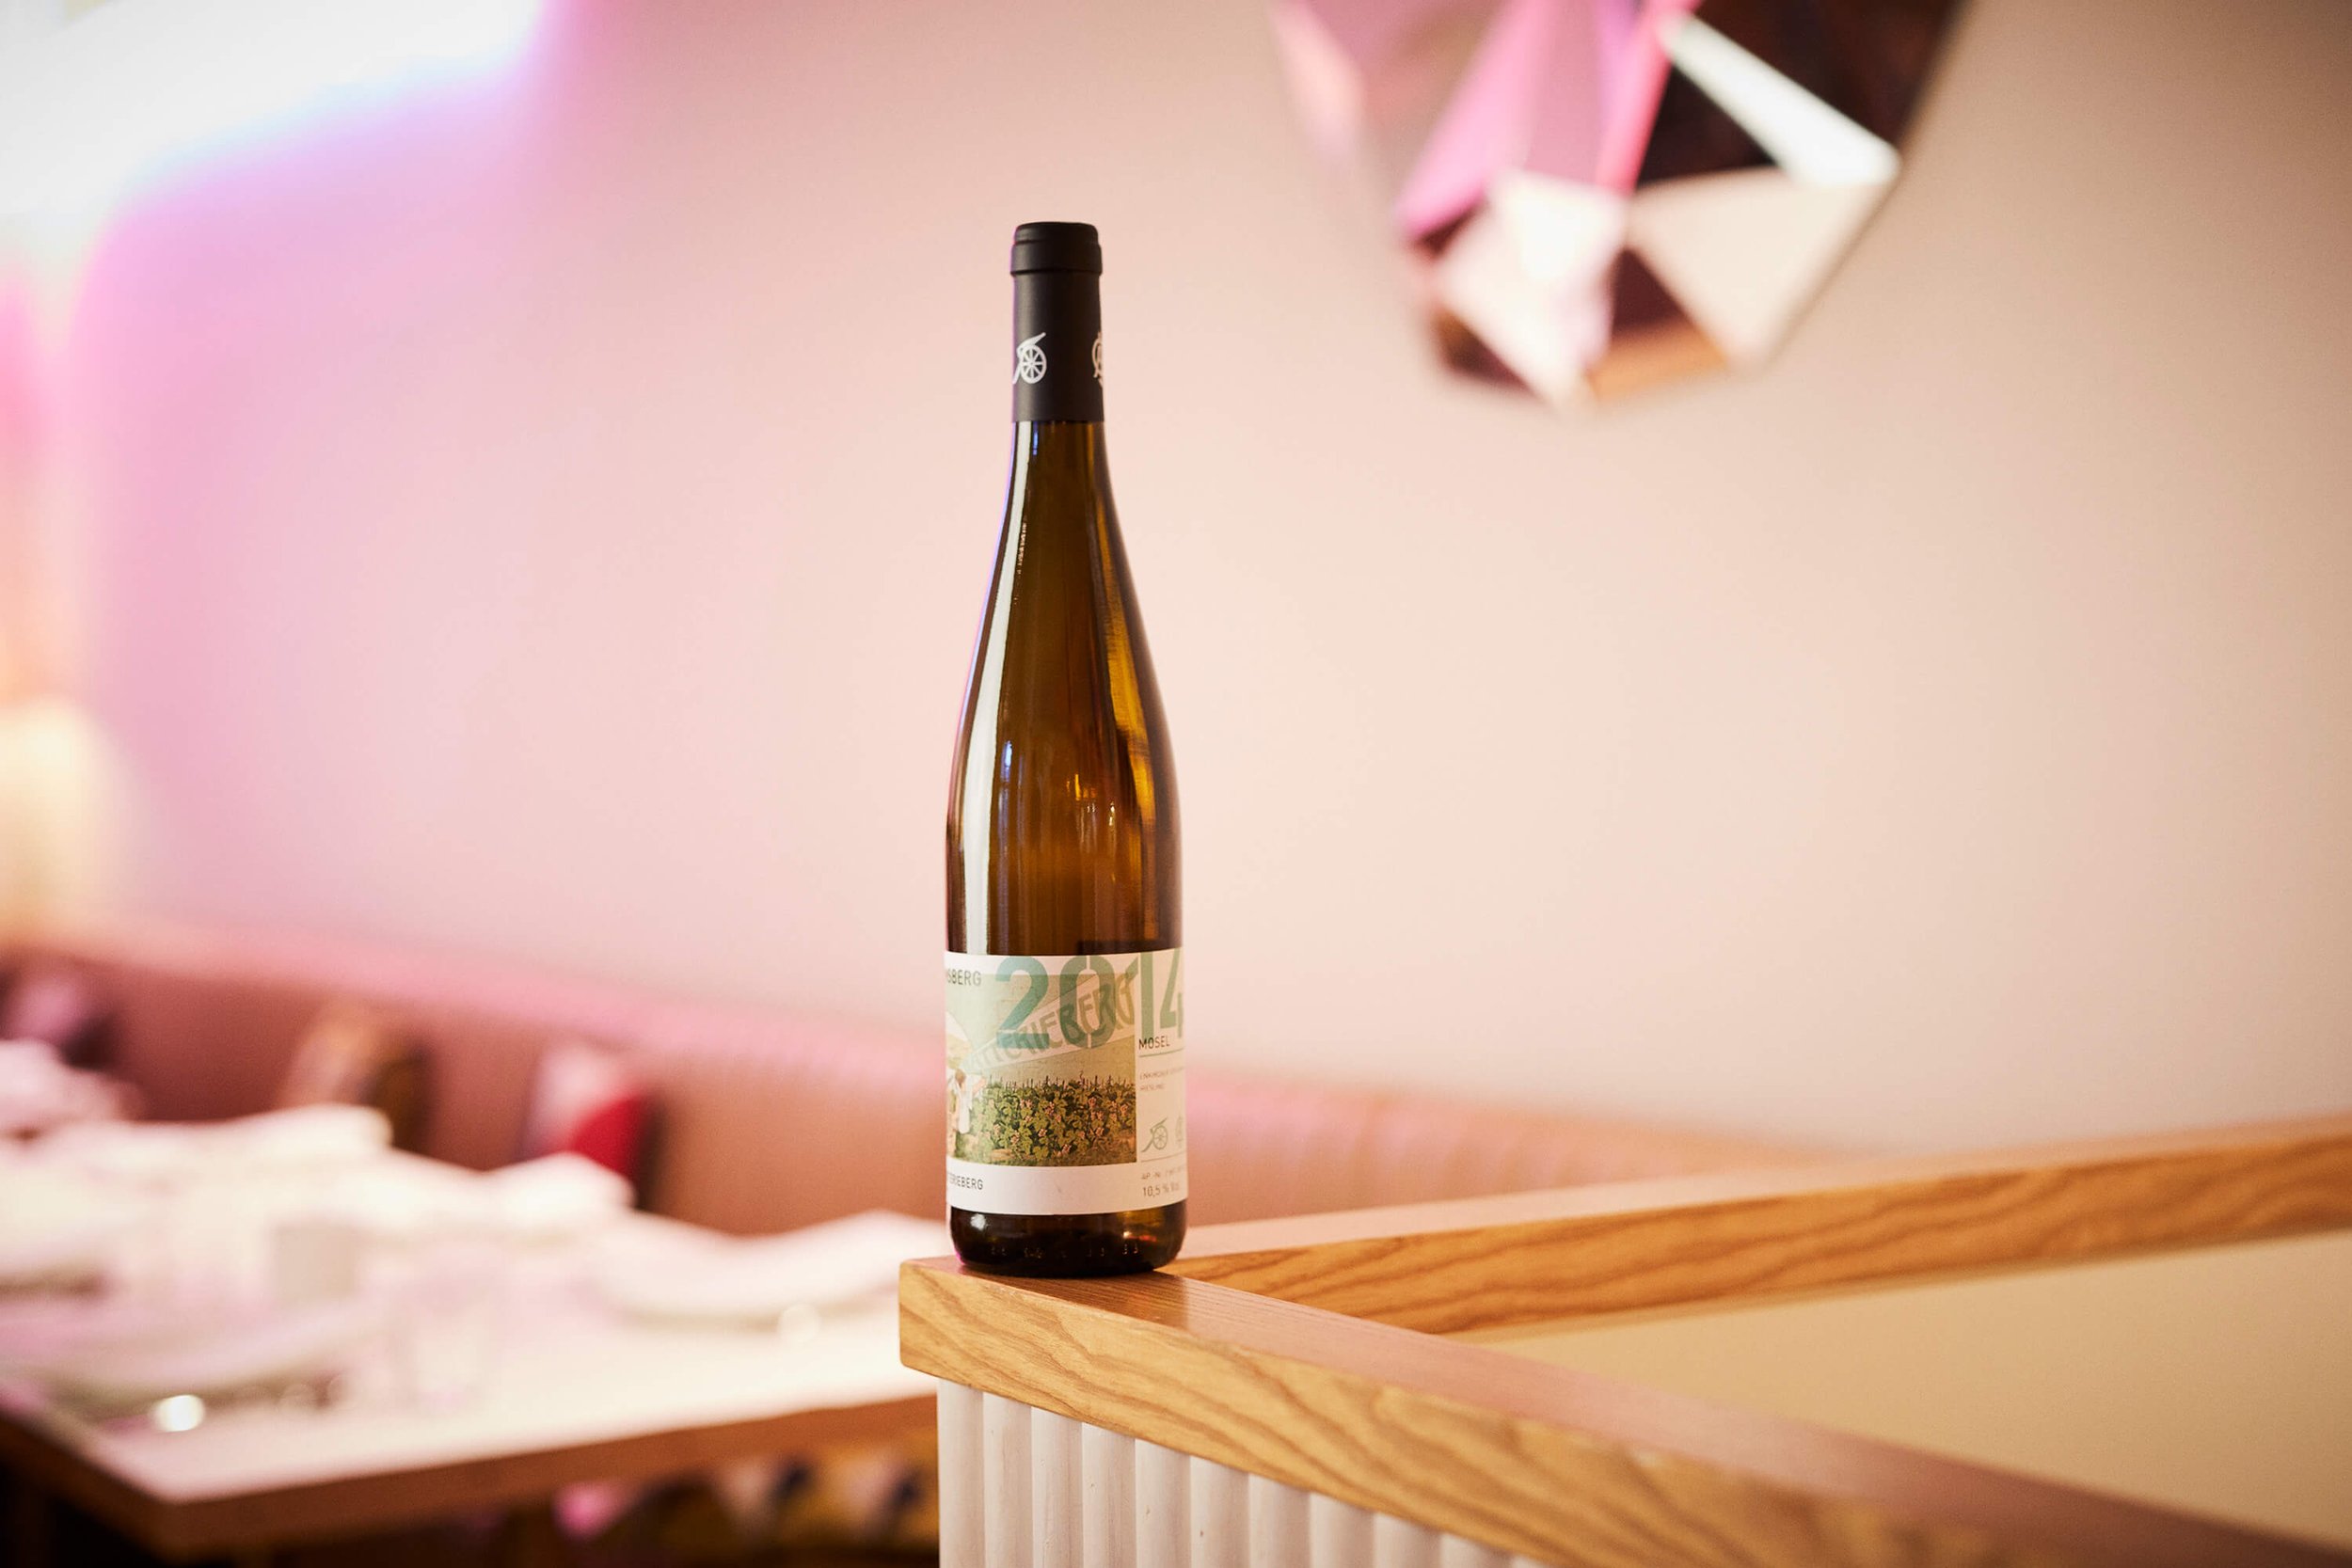 Beverages | Immich Batterieberg Steffenberg, Riesling 2014, Moselle | OH, PANAMA